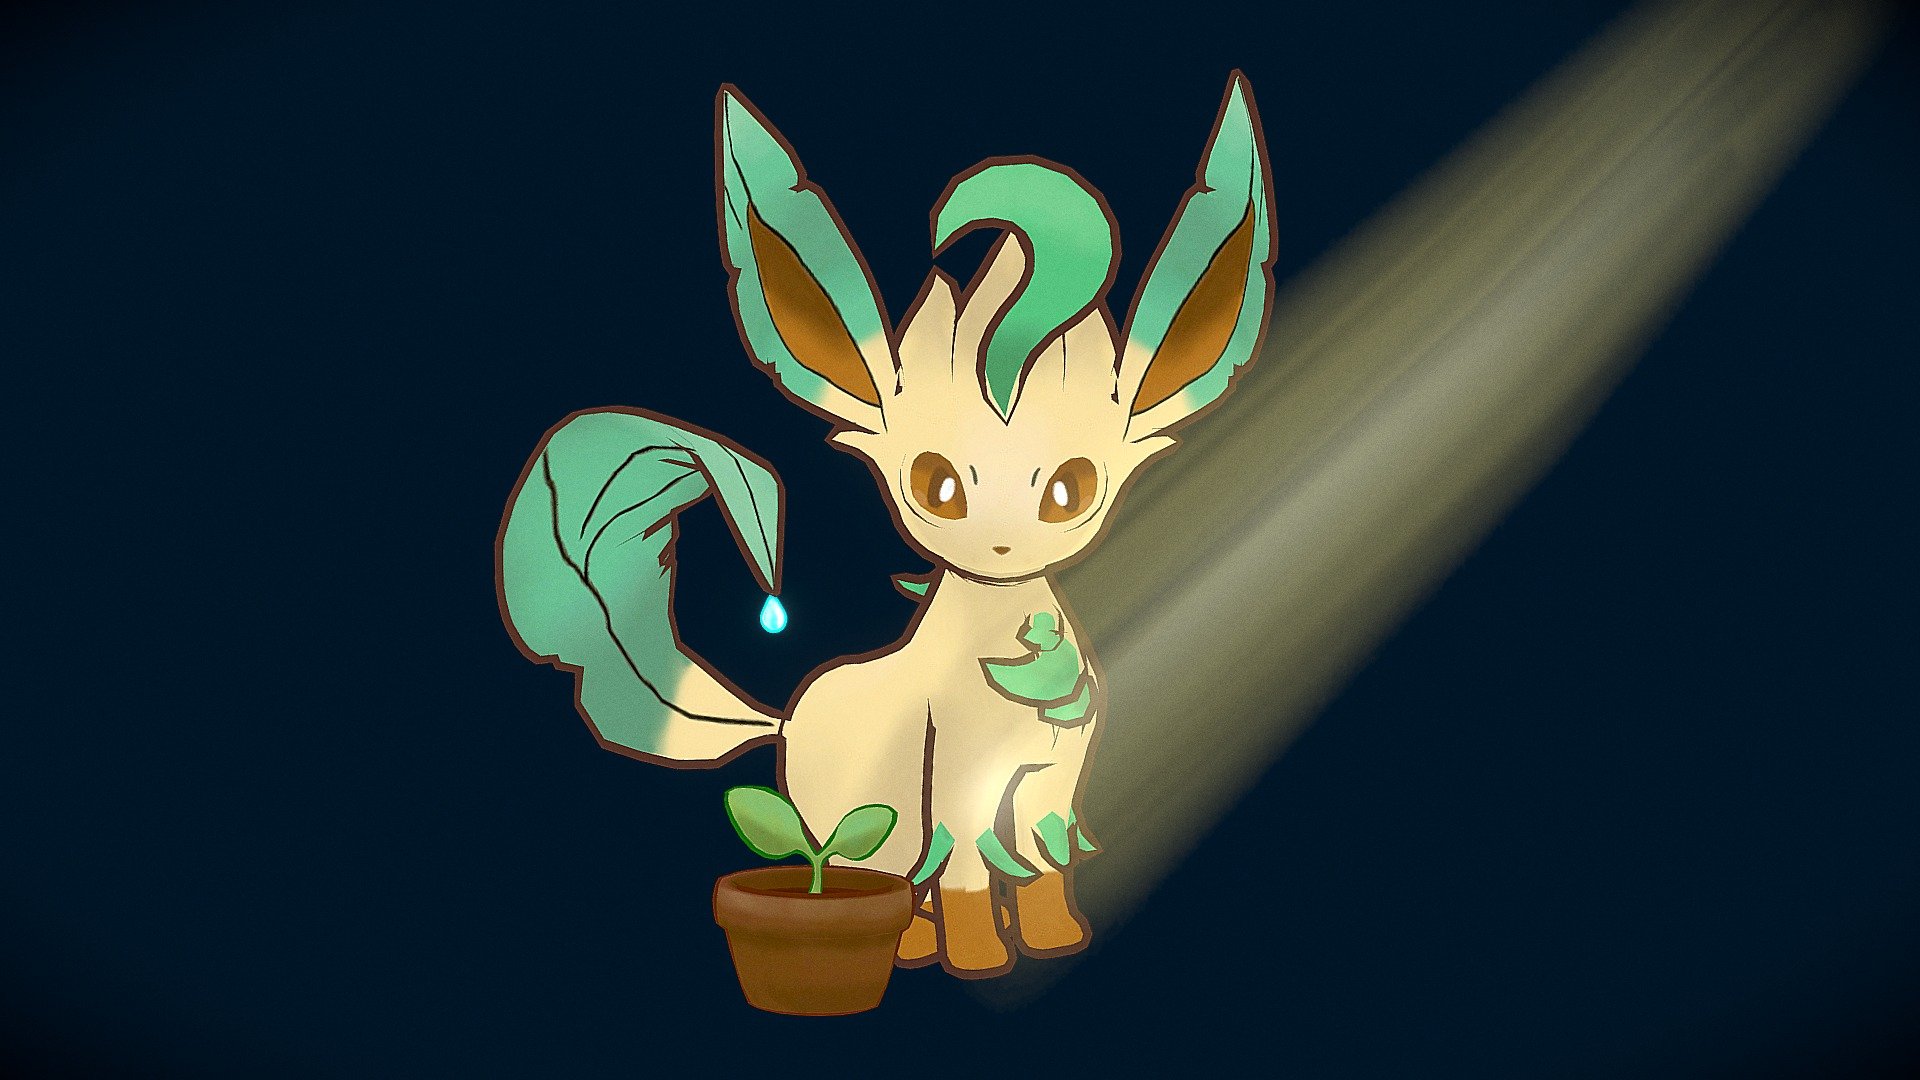 Little 3D model of a Pokemon named Leafeon. Model has a rig and simple animation. Textures are handpainted and it has cellshading.

This is one of many Eevee evolutions in Pokemon 3d model